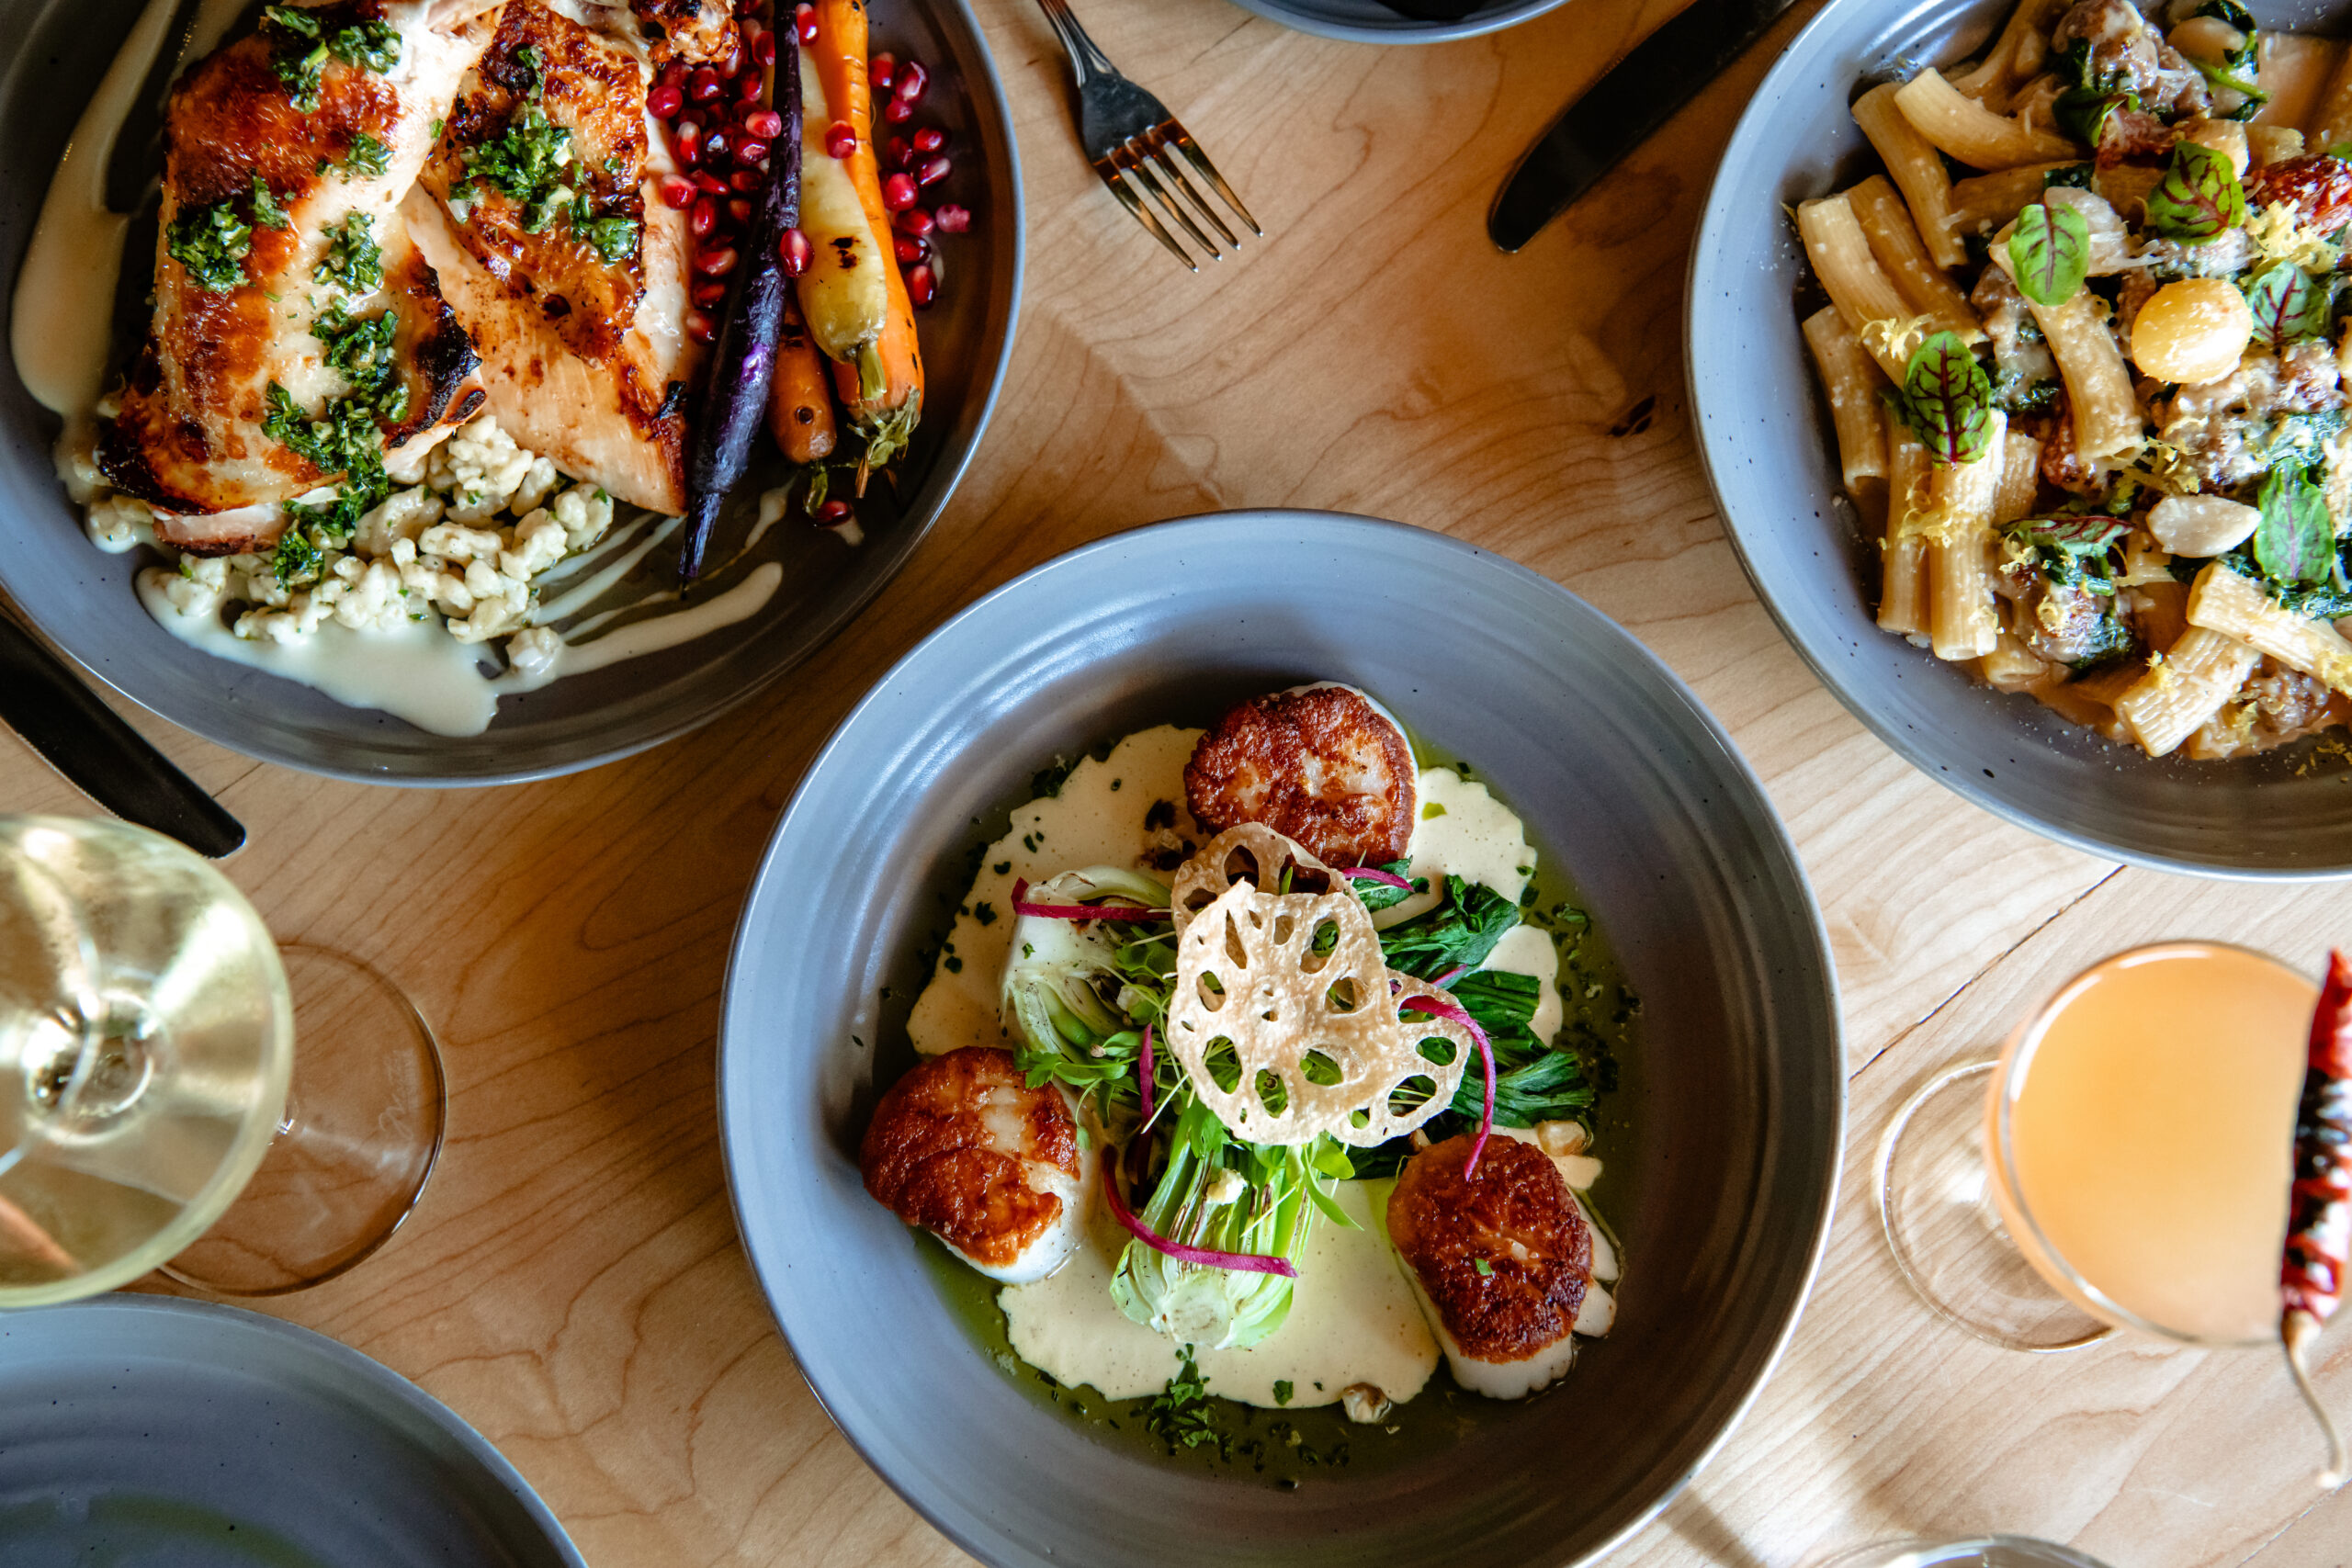 Experience late summer in the heart of Denver's West Highland neighborhood like never before! Come and check out this Michelin Star restaurant by Chef Daniel Mangin under the shade of a majestic elm tree.